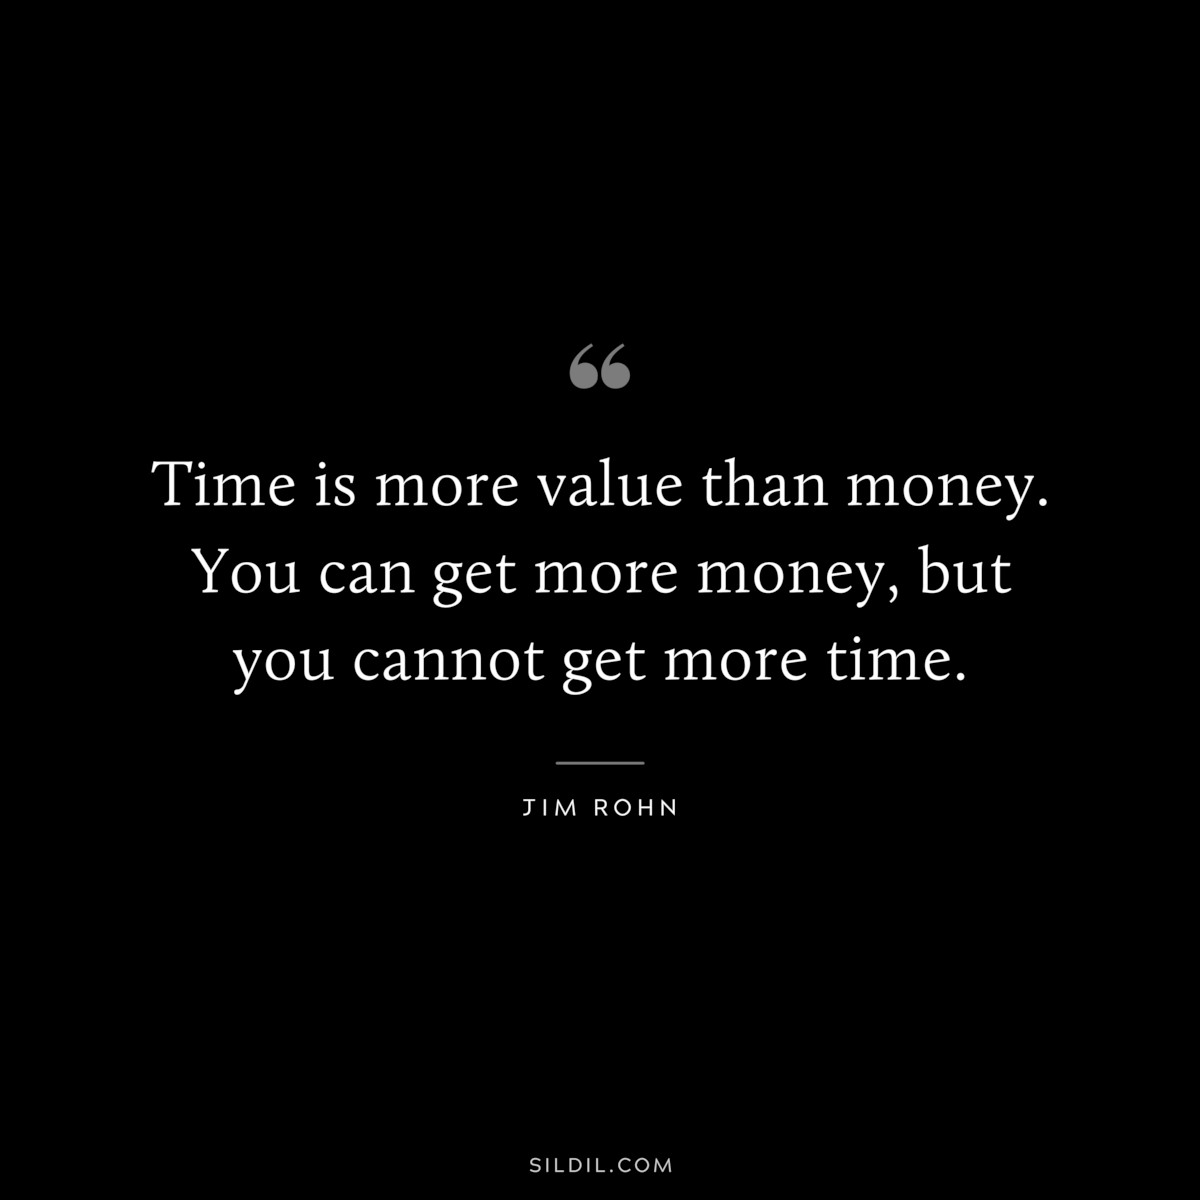 Time is more value than money. You can get more money, but you cannot get more time. ― Jim Rohn